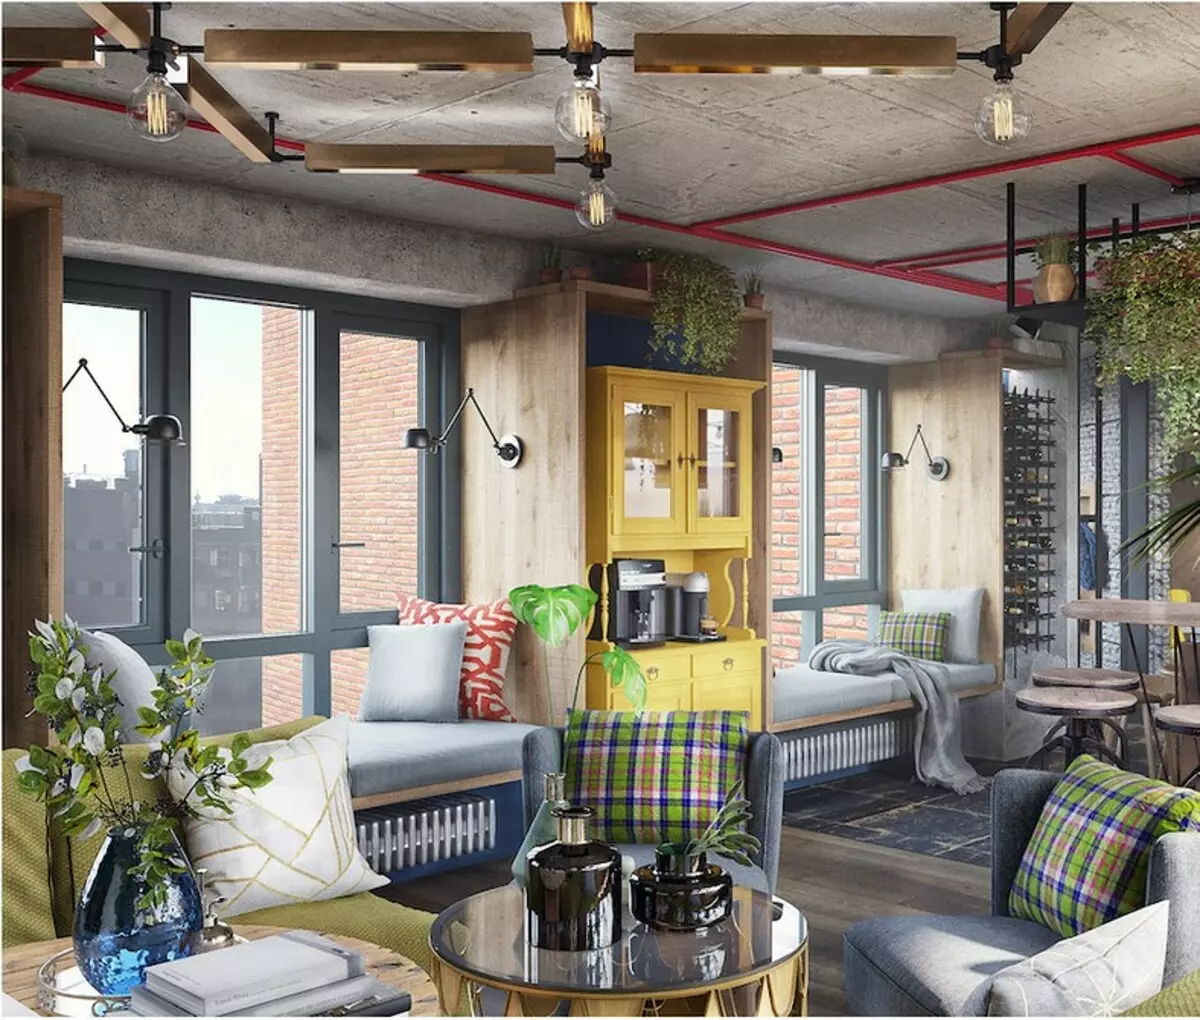 Bright design mix: Loft, Industrial, Eco and Country in the interior of the apartment 11128_32